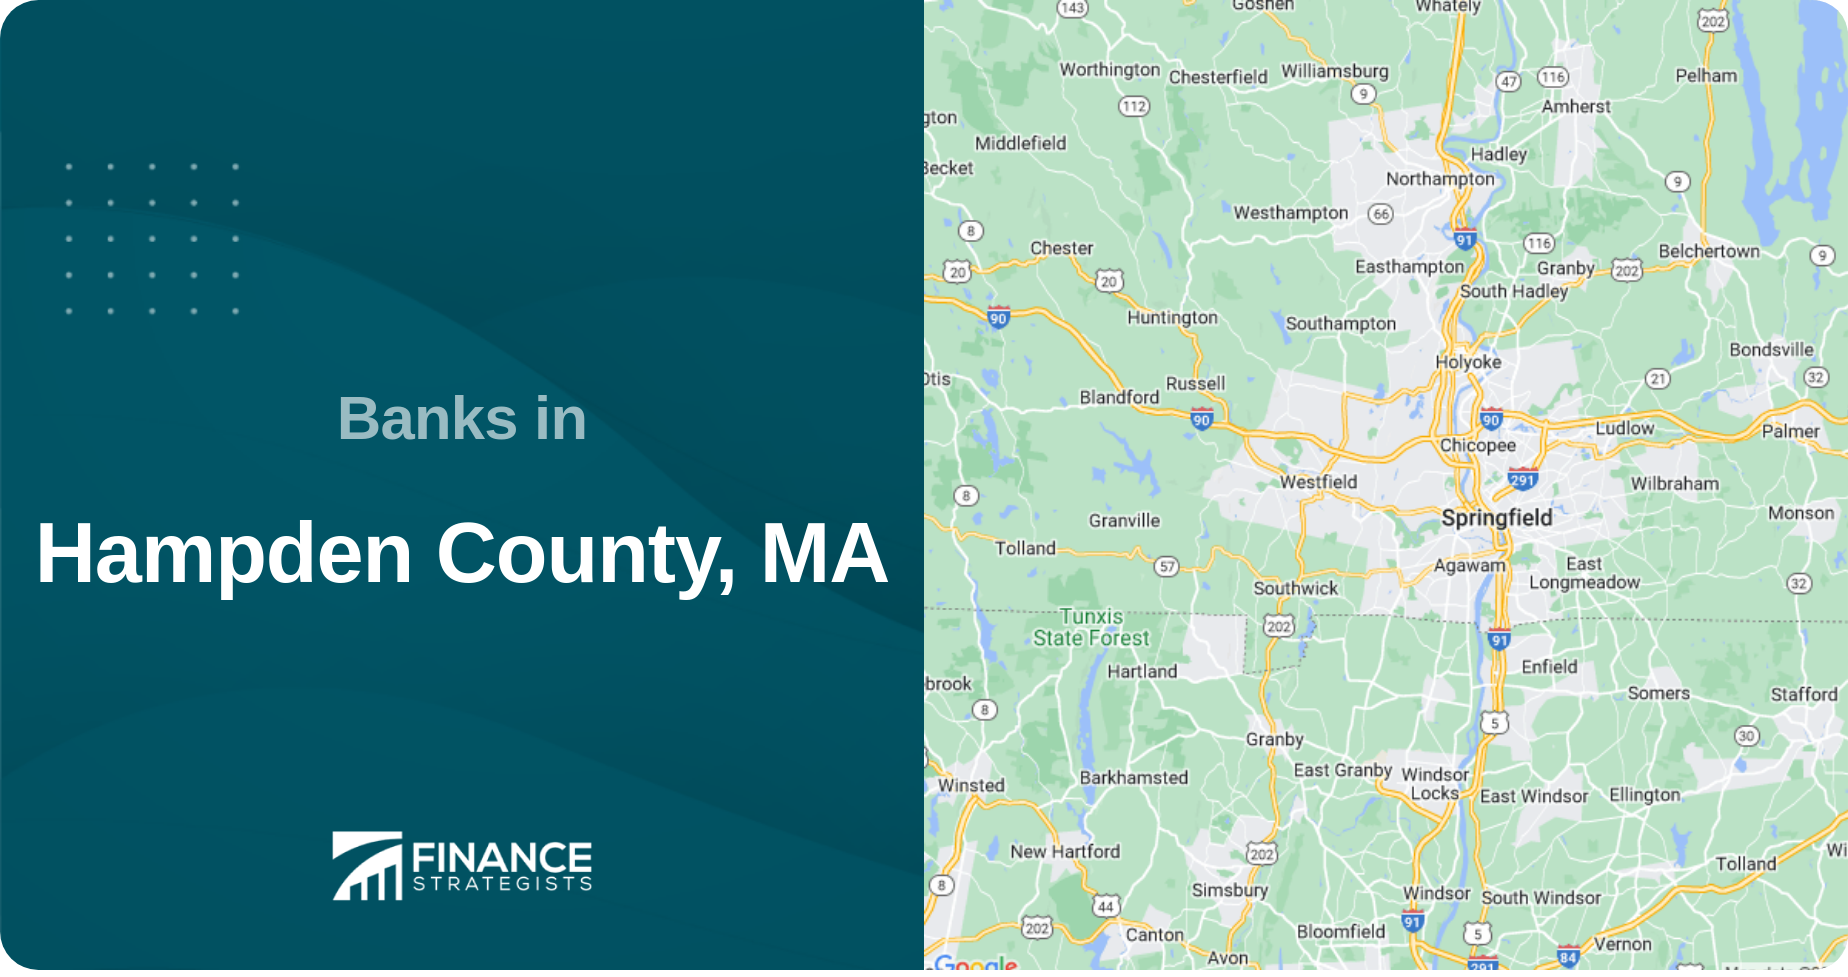 Banks in Hampden County, MA